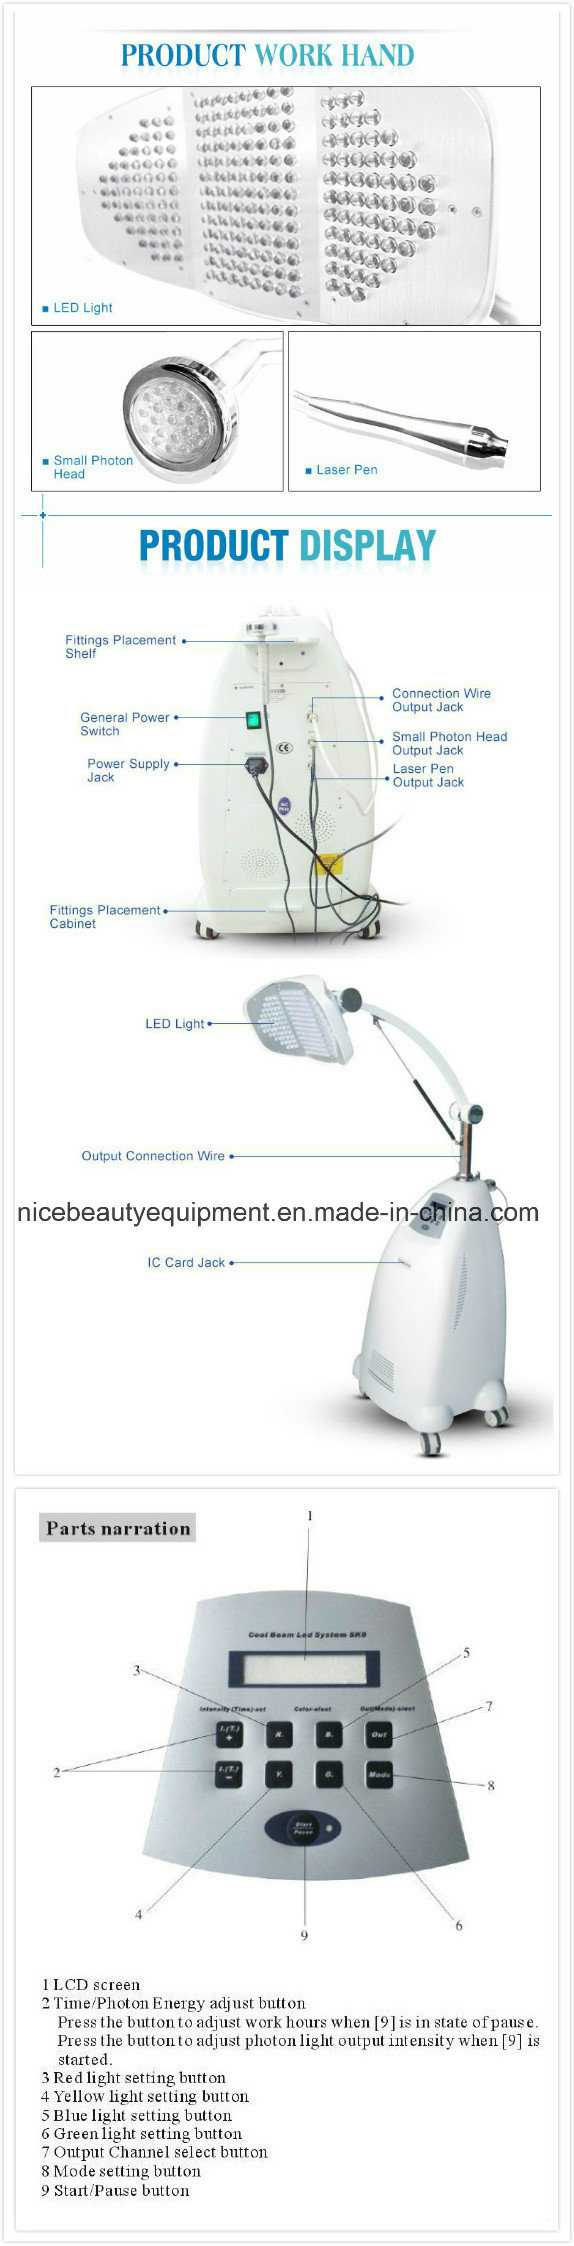 New Vibration Iontophoresis Instrument for Cleansing Skin and Facial Care Personal